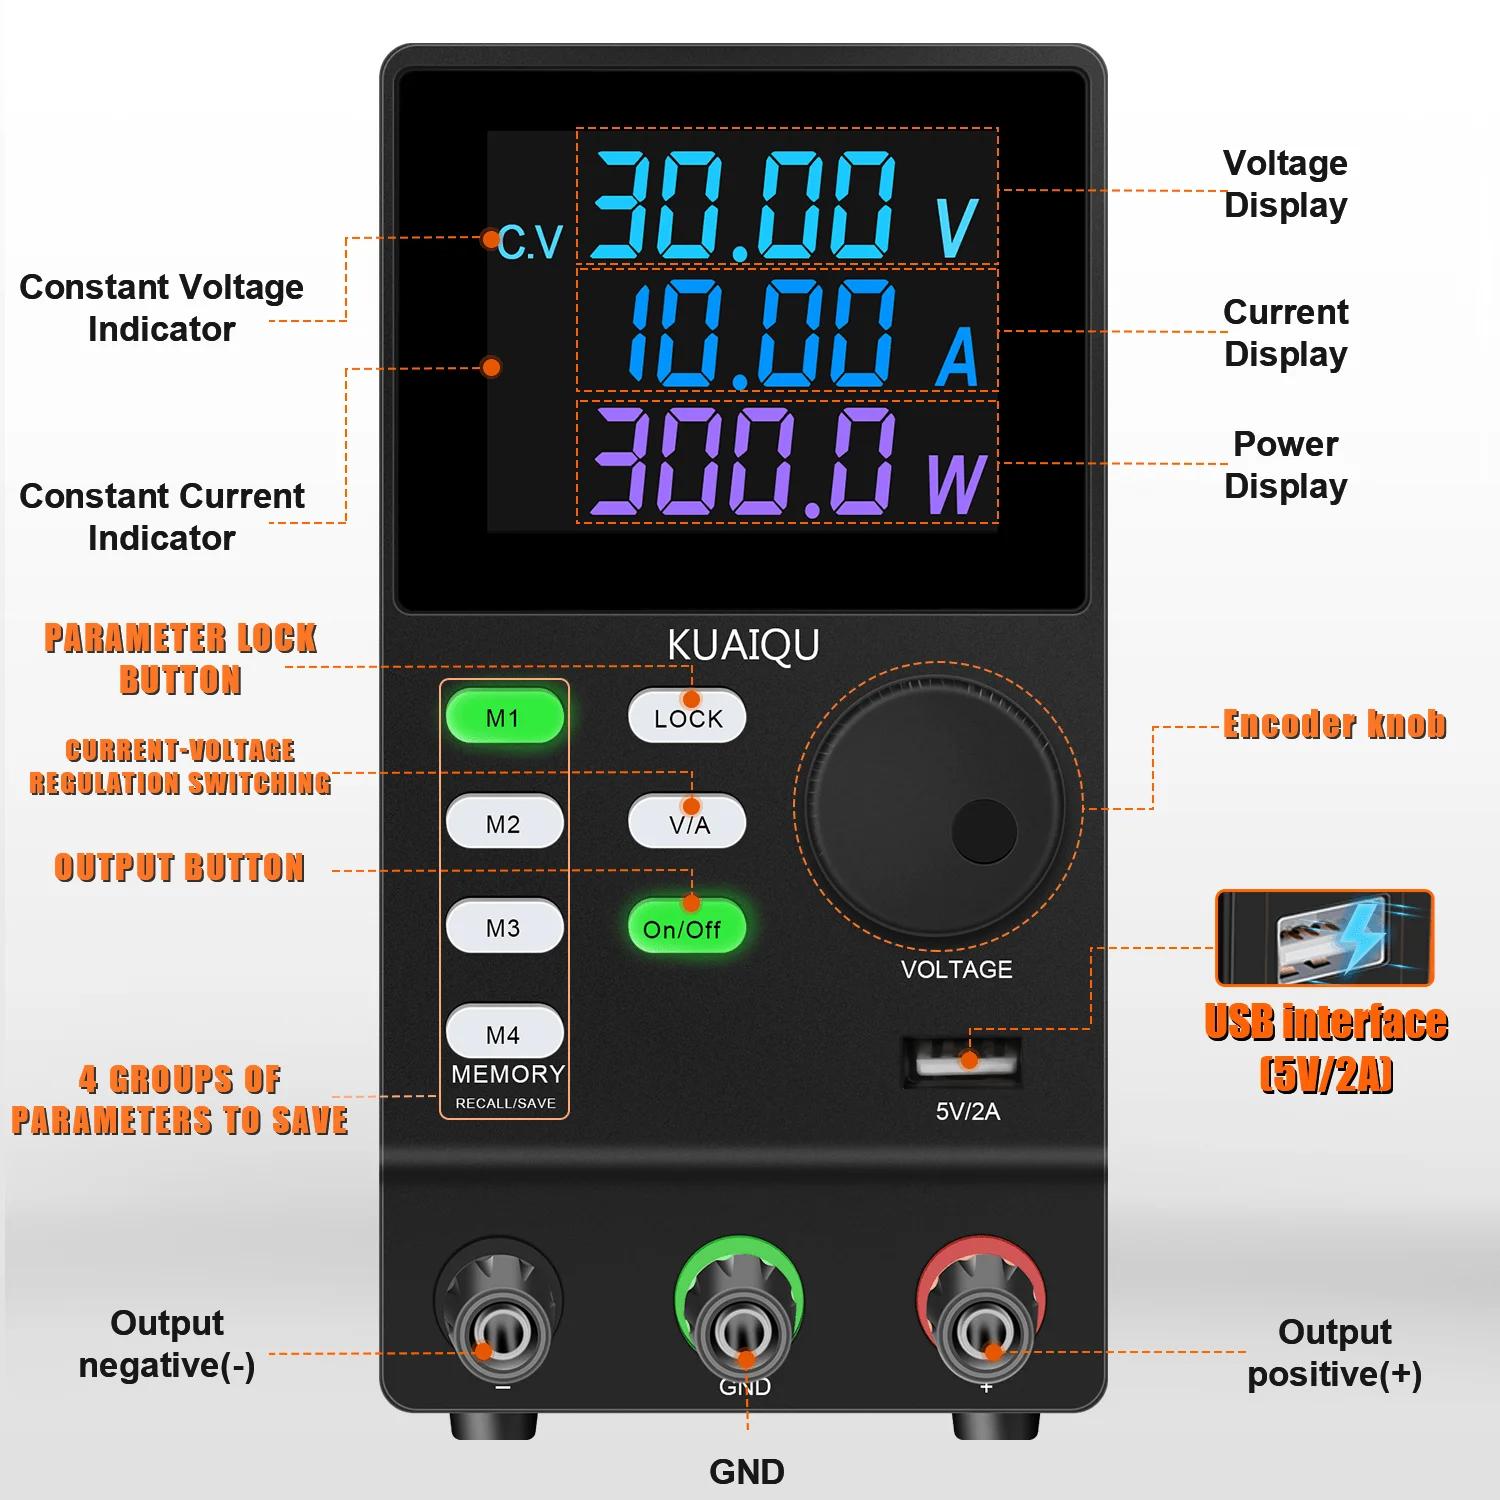 S21e80d6426cd48a4bcb51d00e1e4d969k DC Power Supplies Adjustable Switching Voltage Regulator 30V10A/30V5A Laboratory Power Supply USB Interface LED Drone Charging